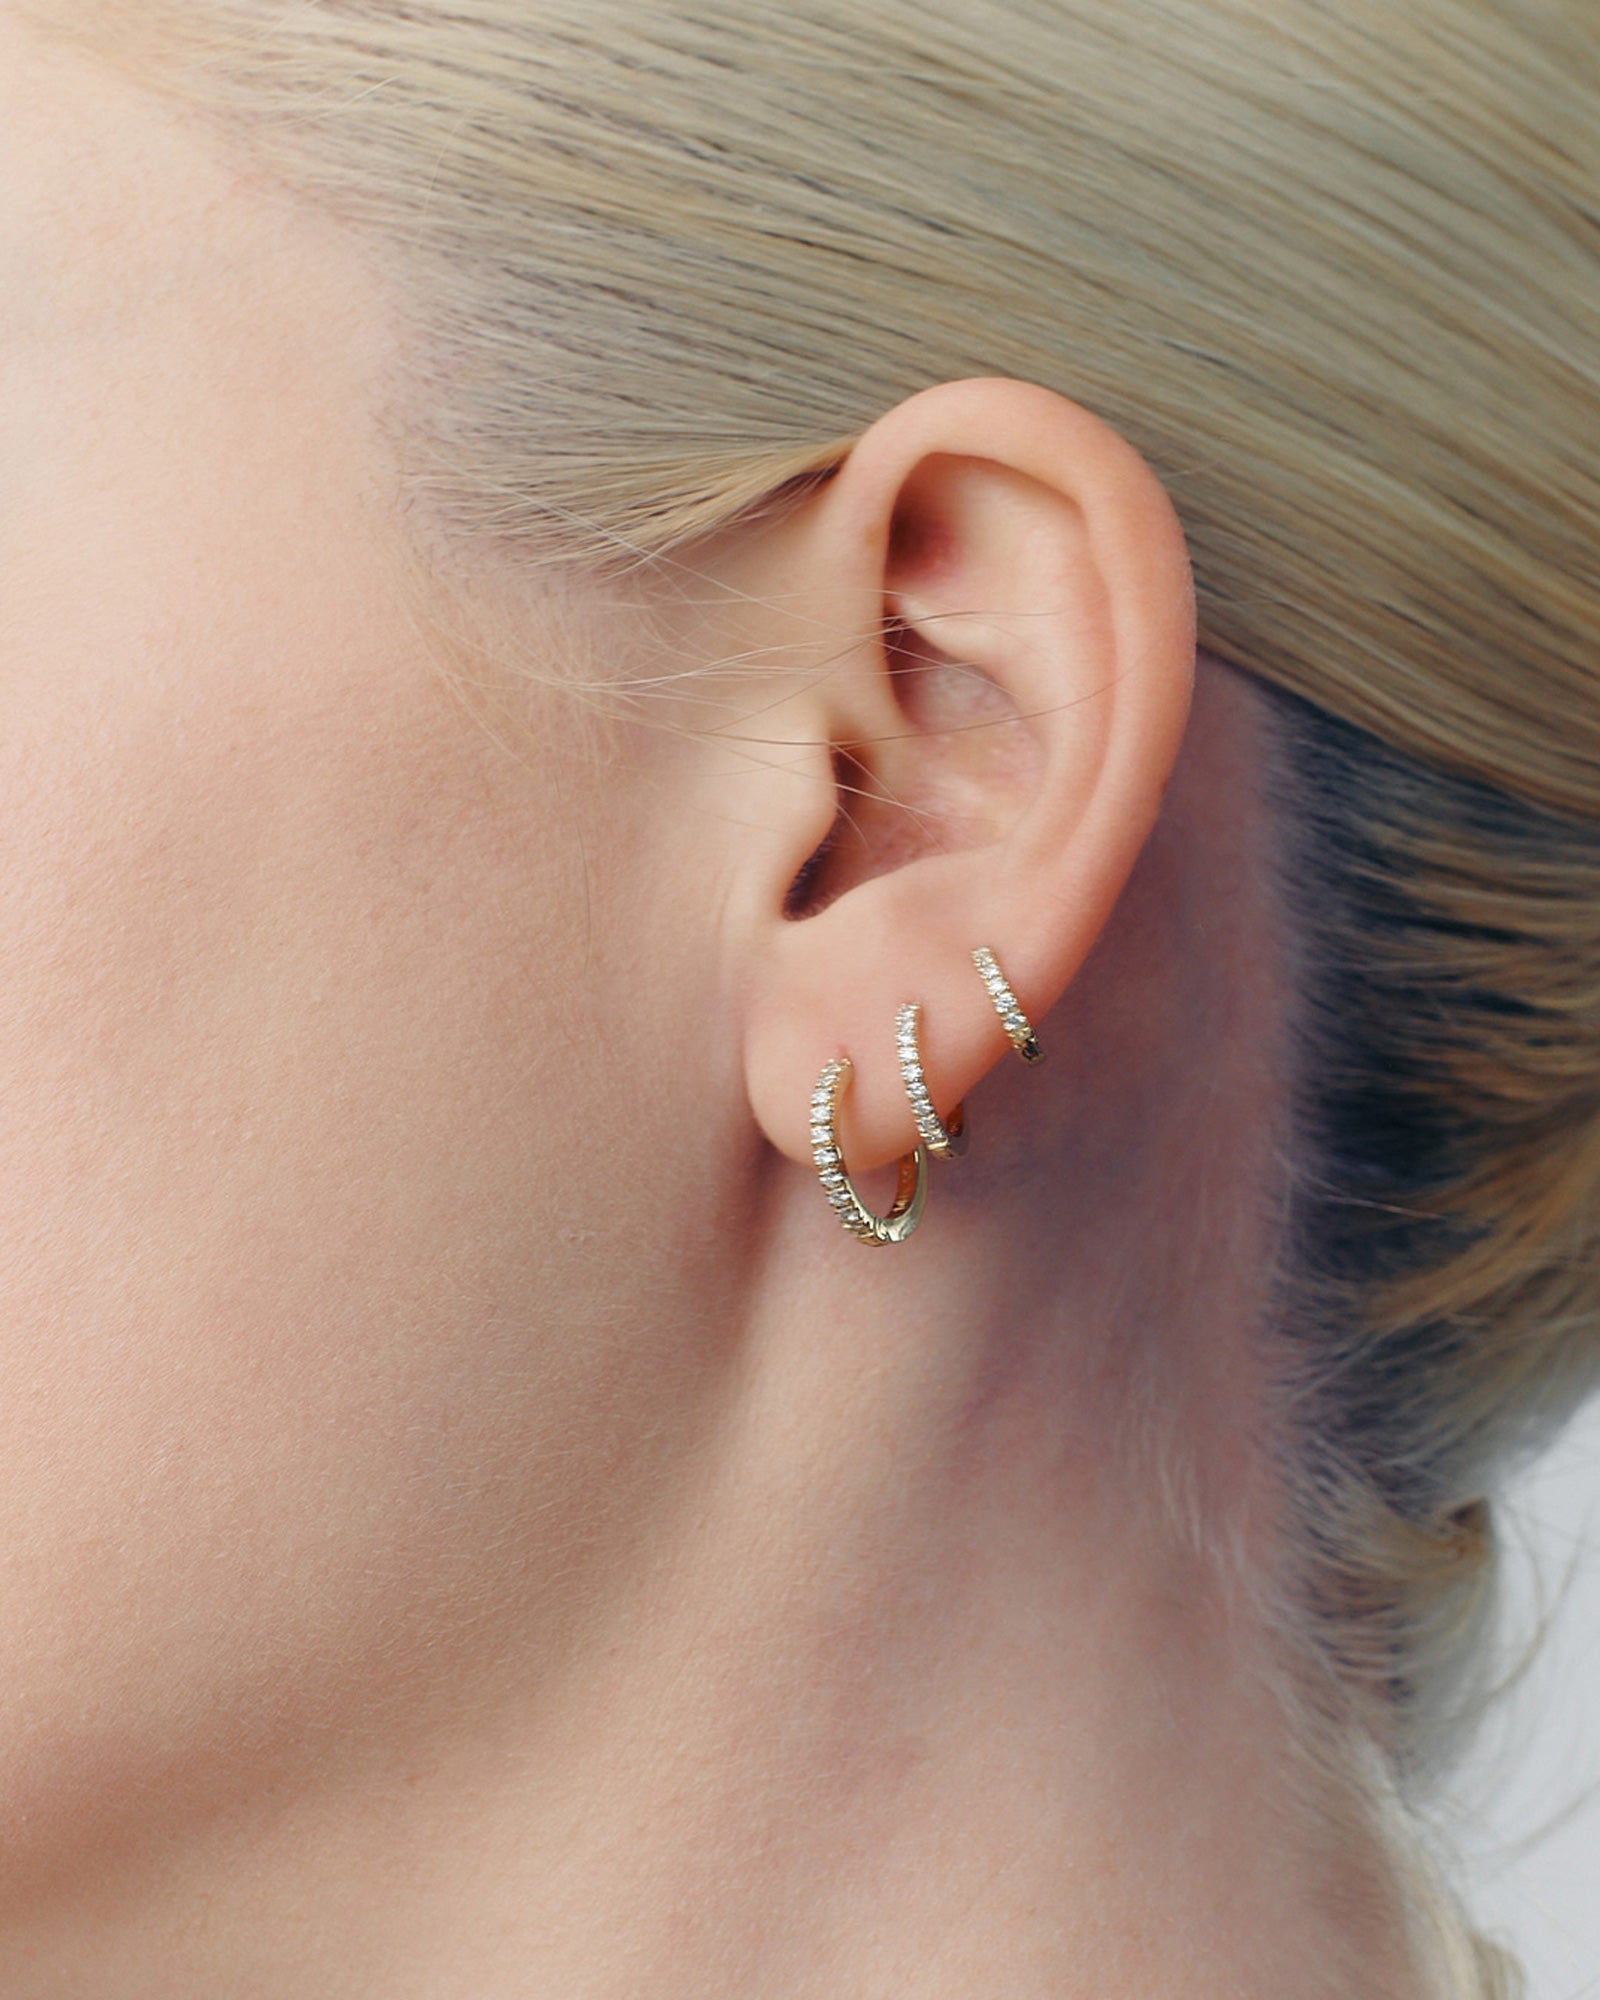 Billy Earrings - White Diamonds - Available In Three Sizes